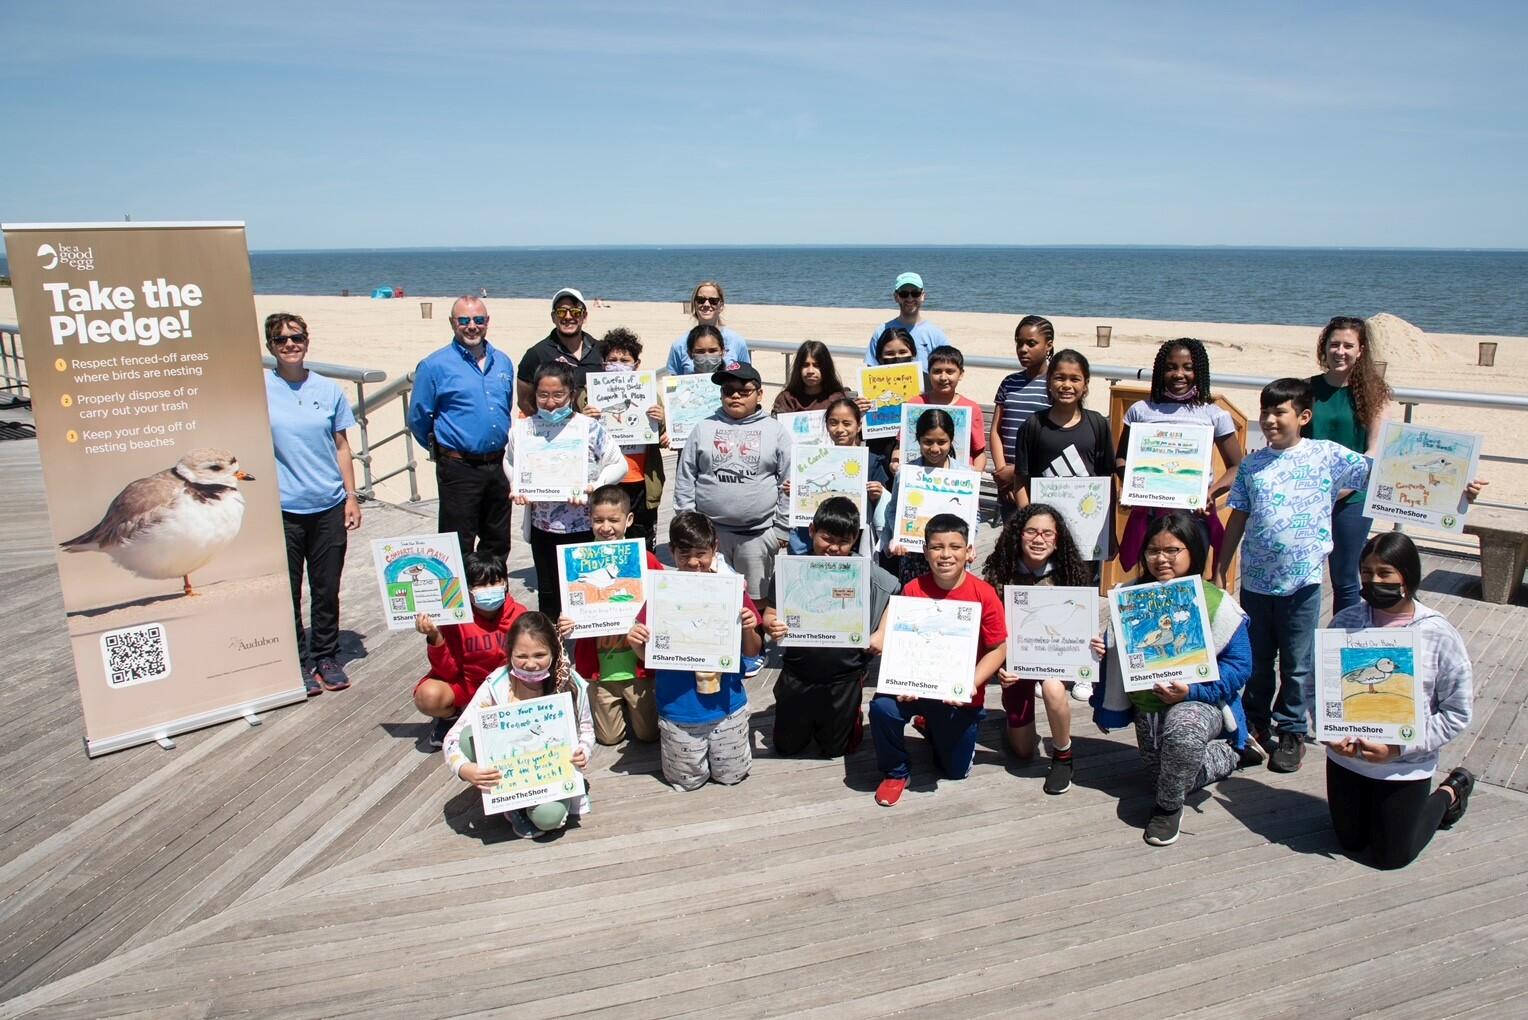 A large group of children with several adults smiling at the camera on a beach boardwalk.  Each child carries a sign showing a hand-drawn illustration warning people to stay away from shorebird nesting sites, drawn by the children.